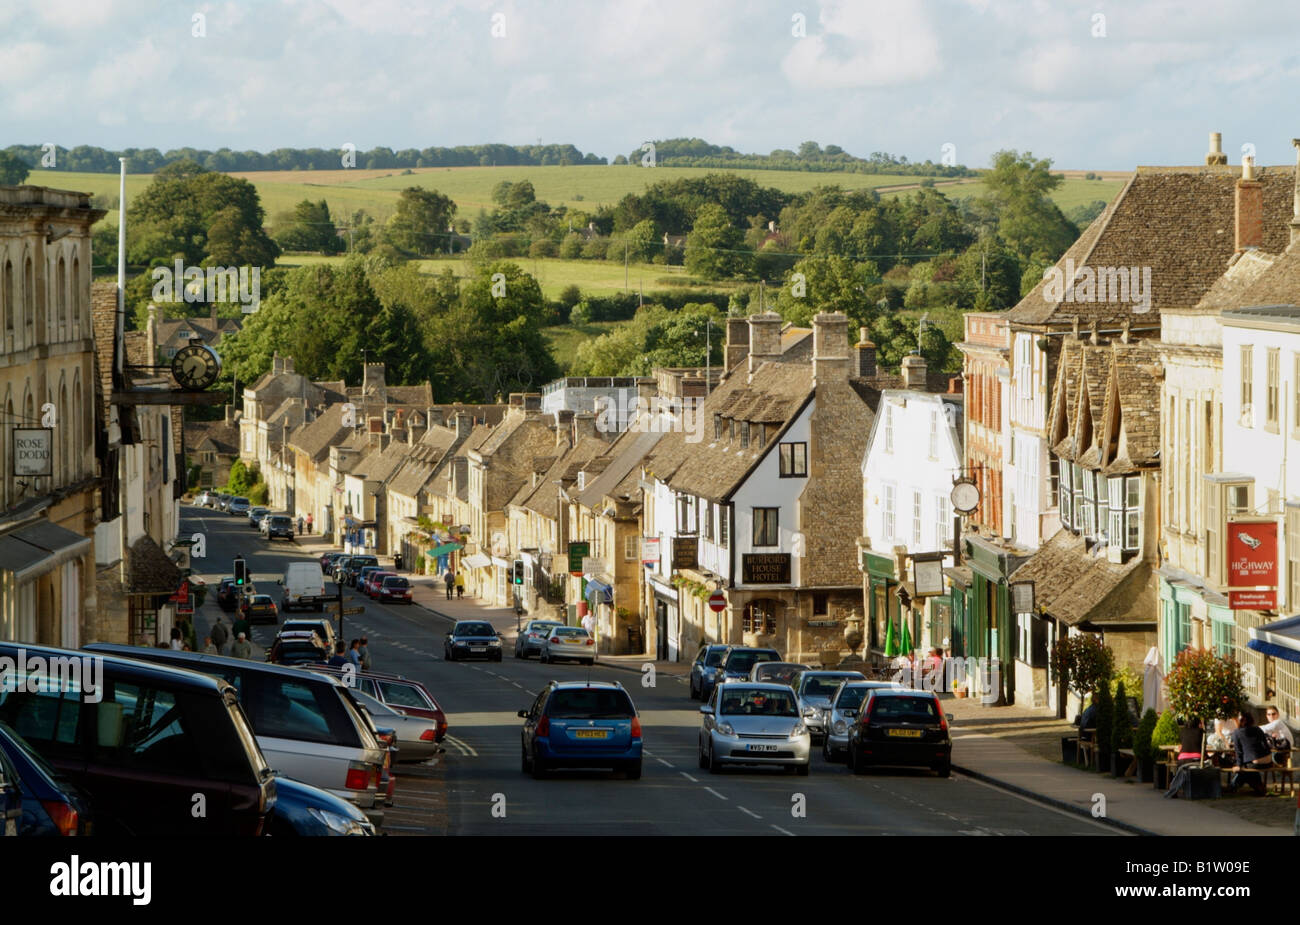 Burford a Cotswold town in Oxfordshire England UK Stock Photo